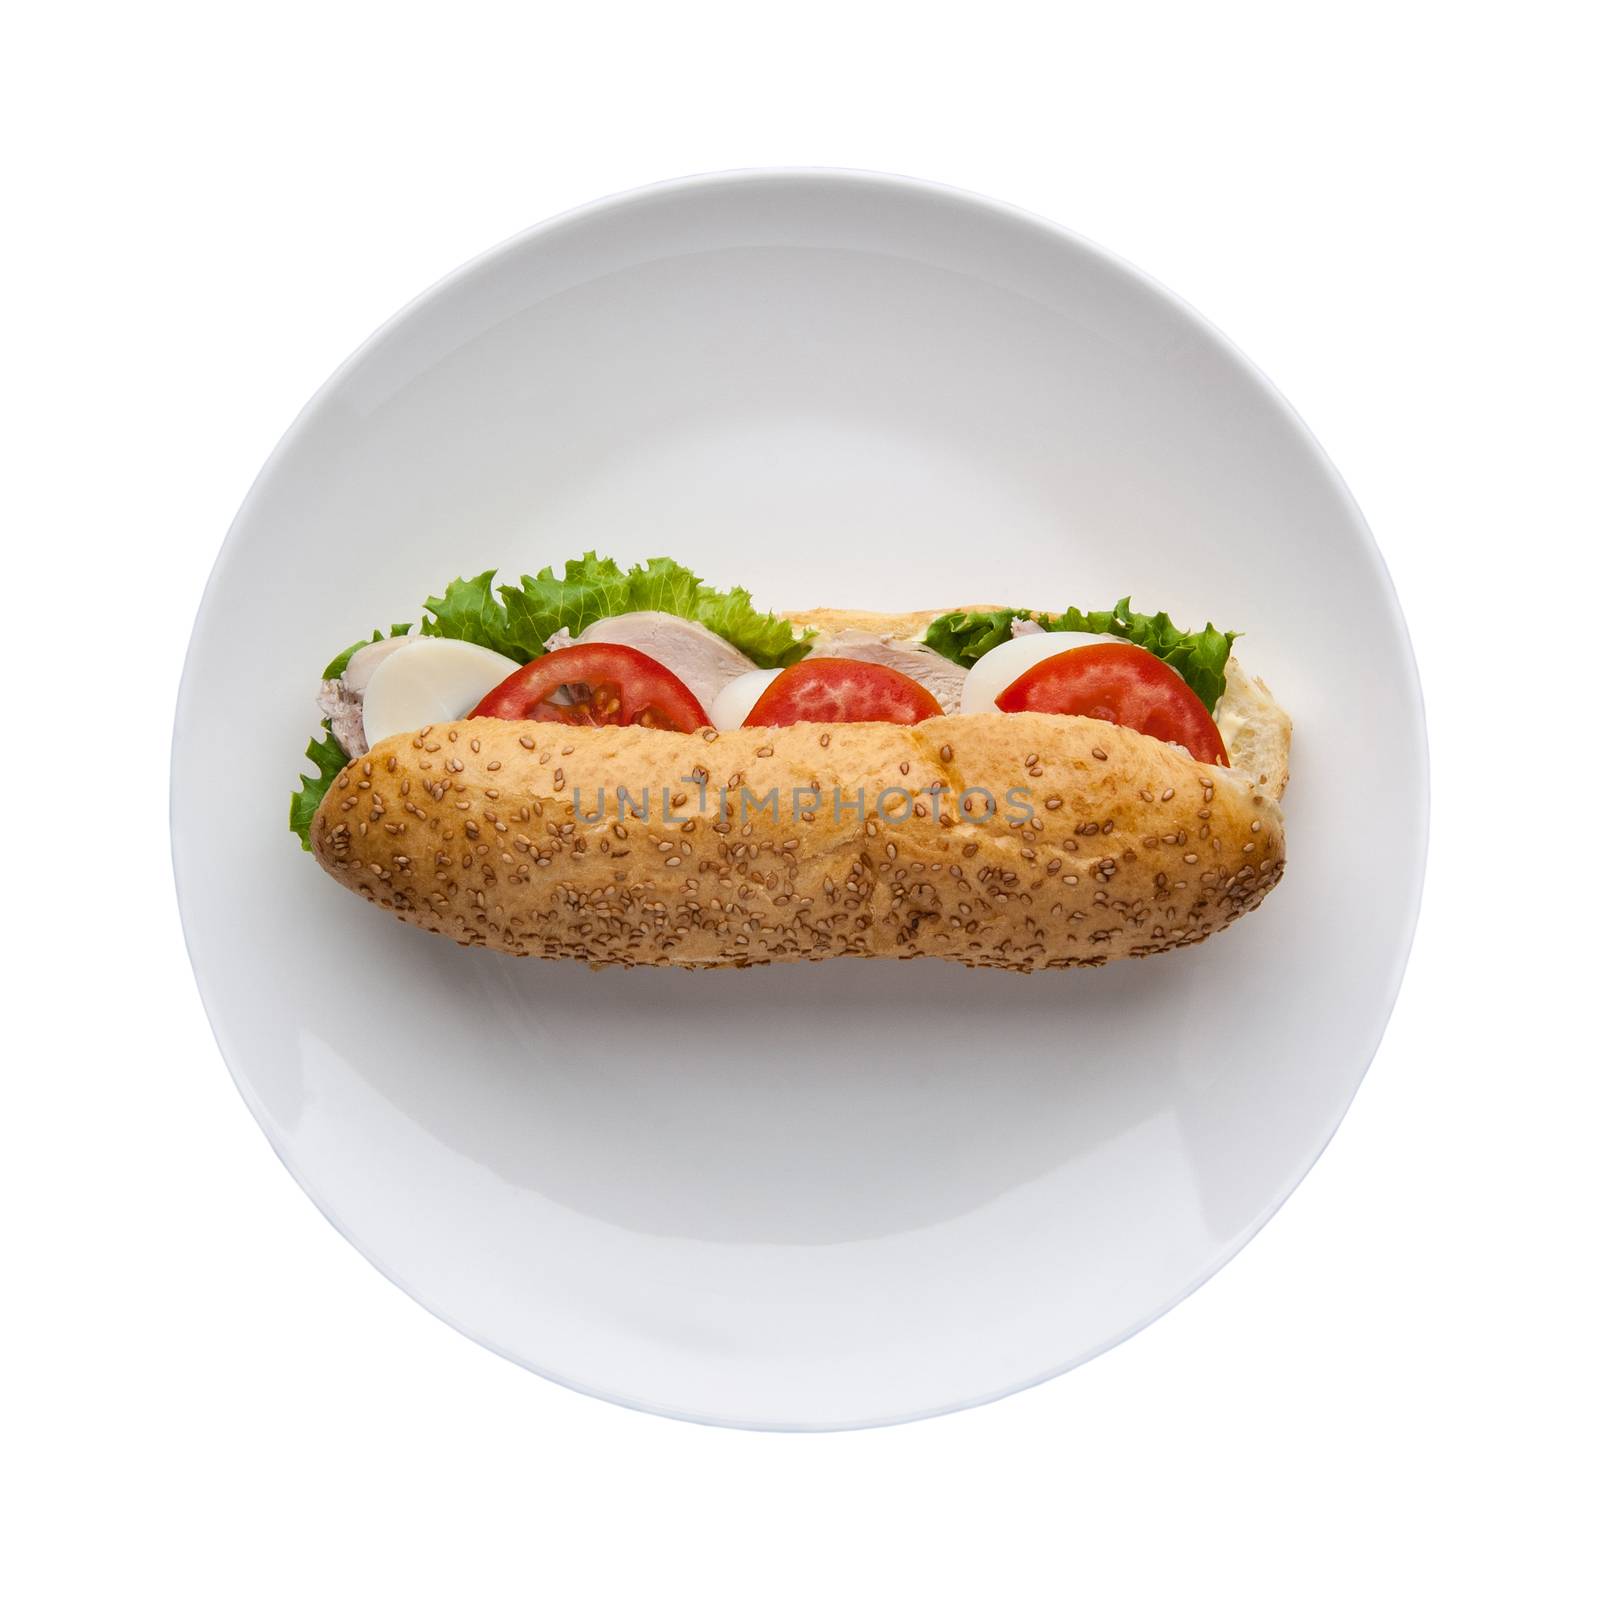 hot dog on a white plate by A_Karim